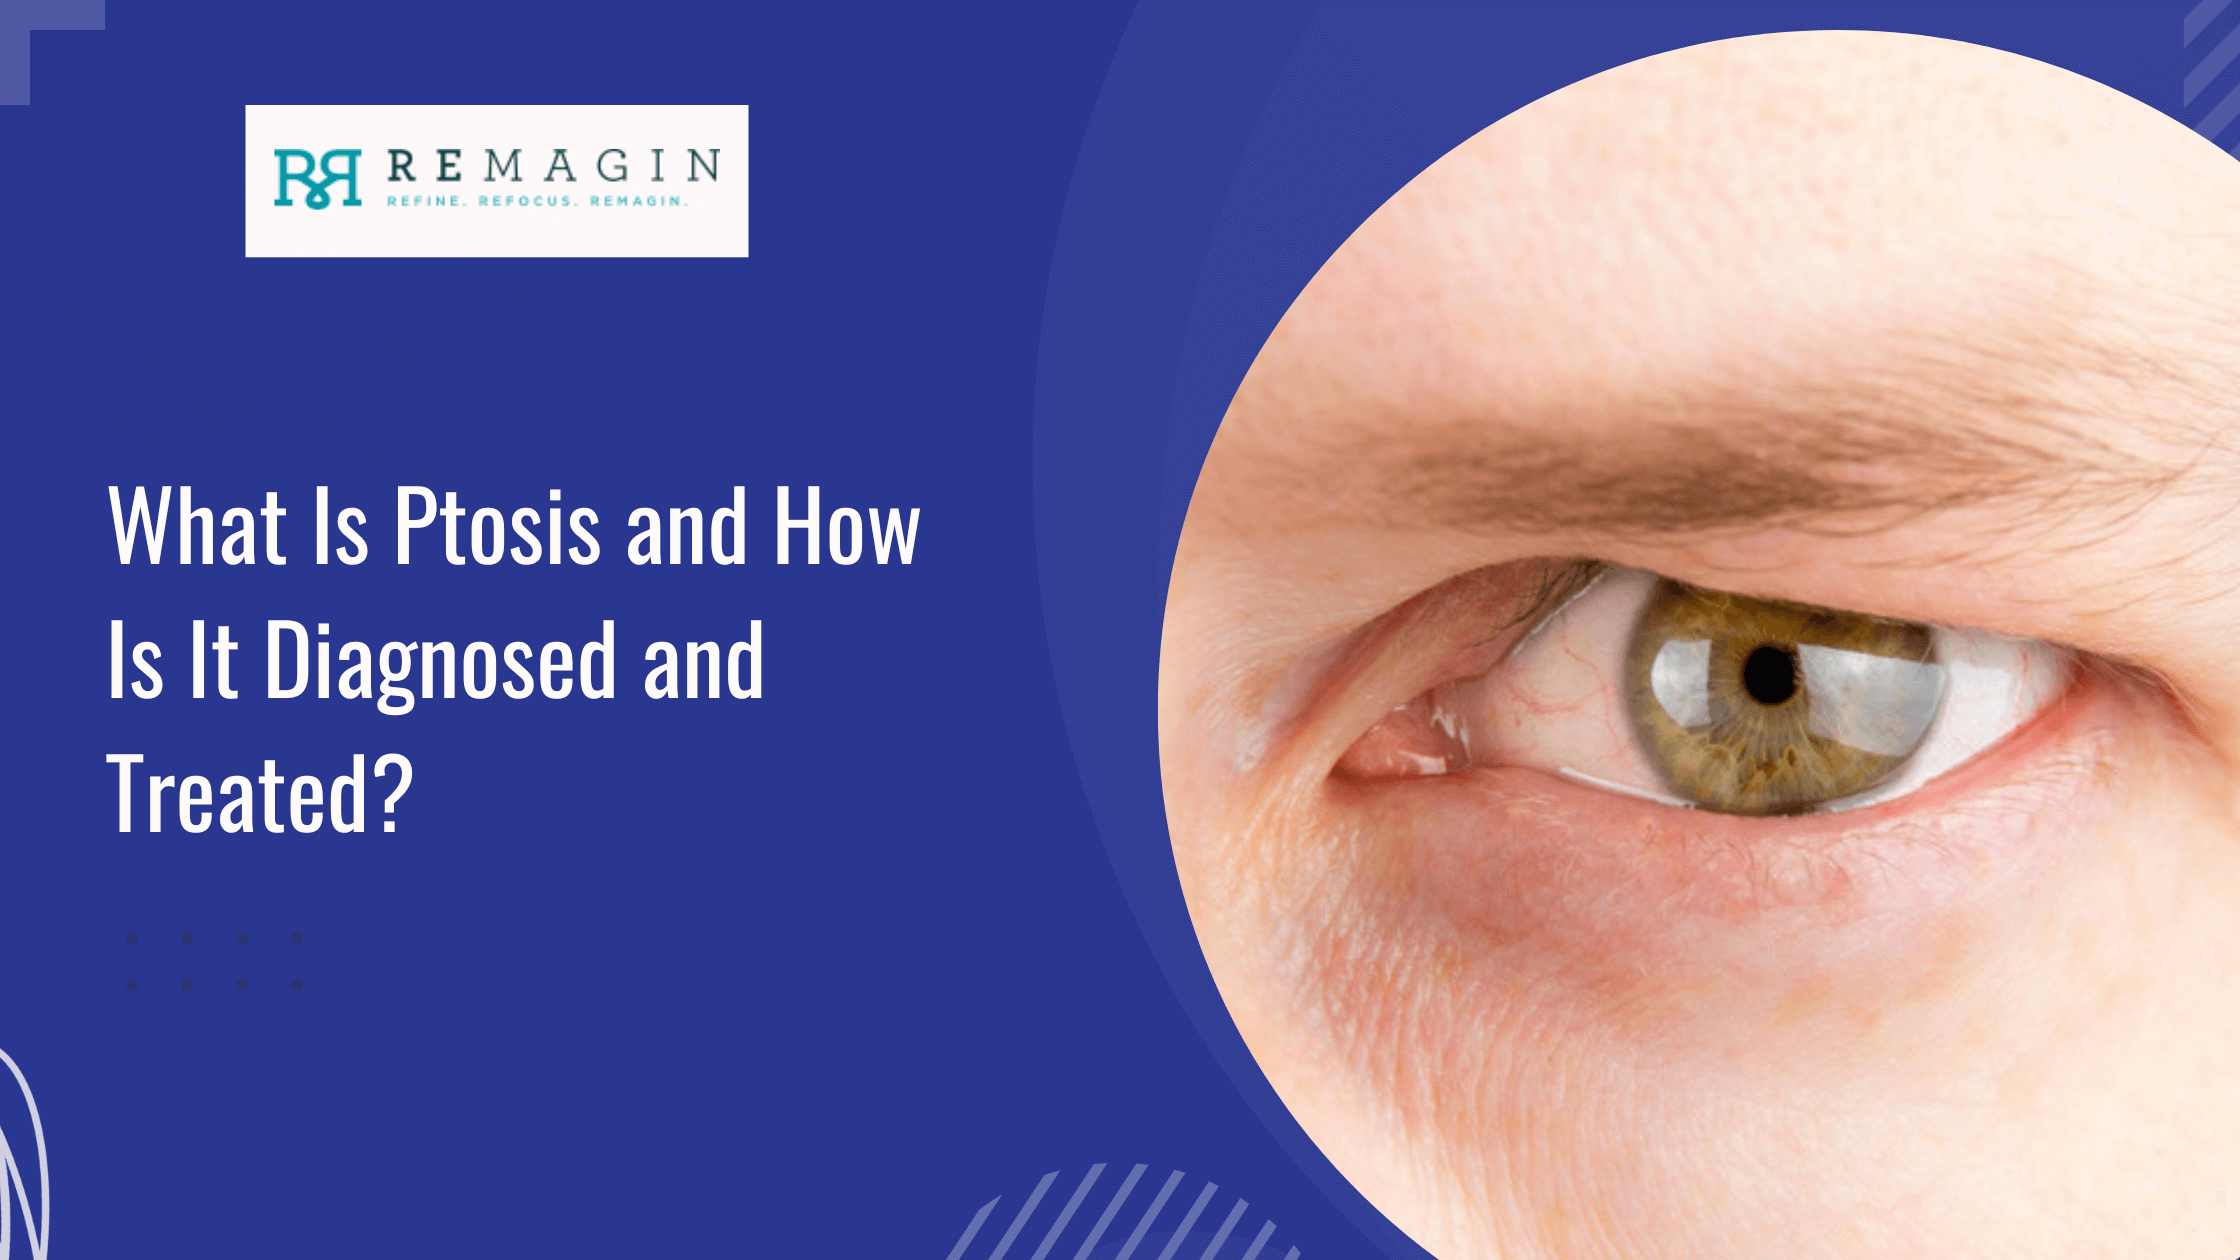 What Is Ptosis and How Is It Diagnosed and Treated?